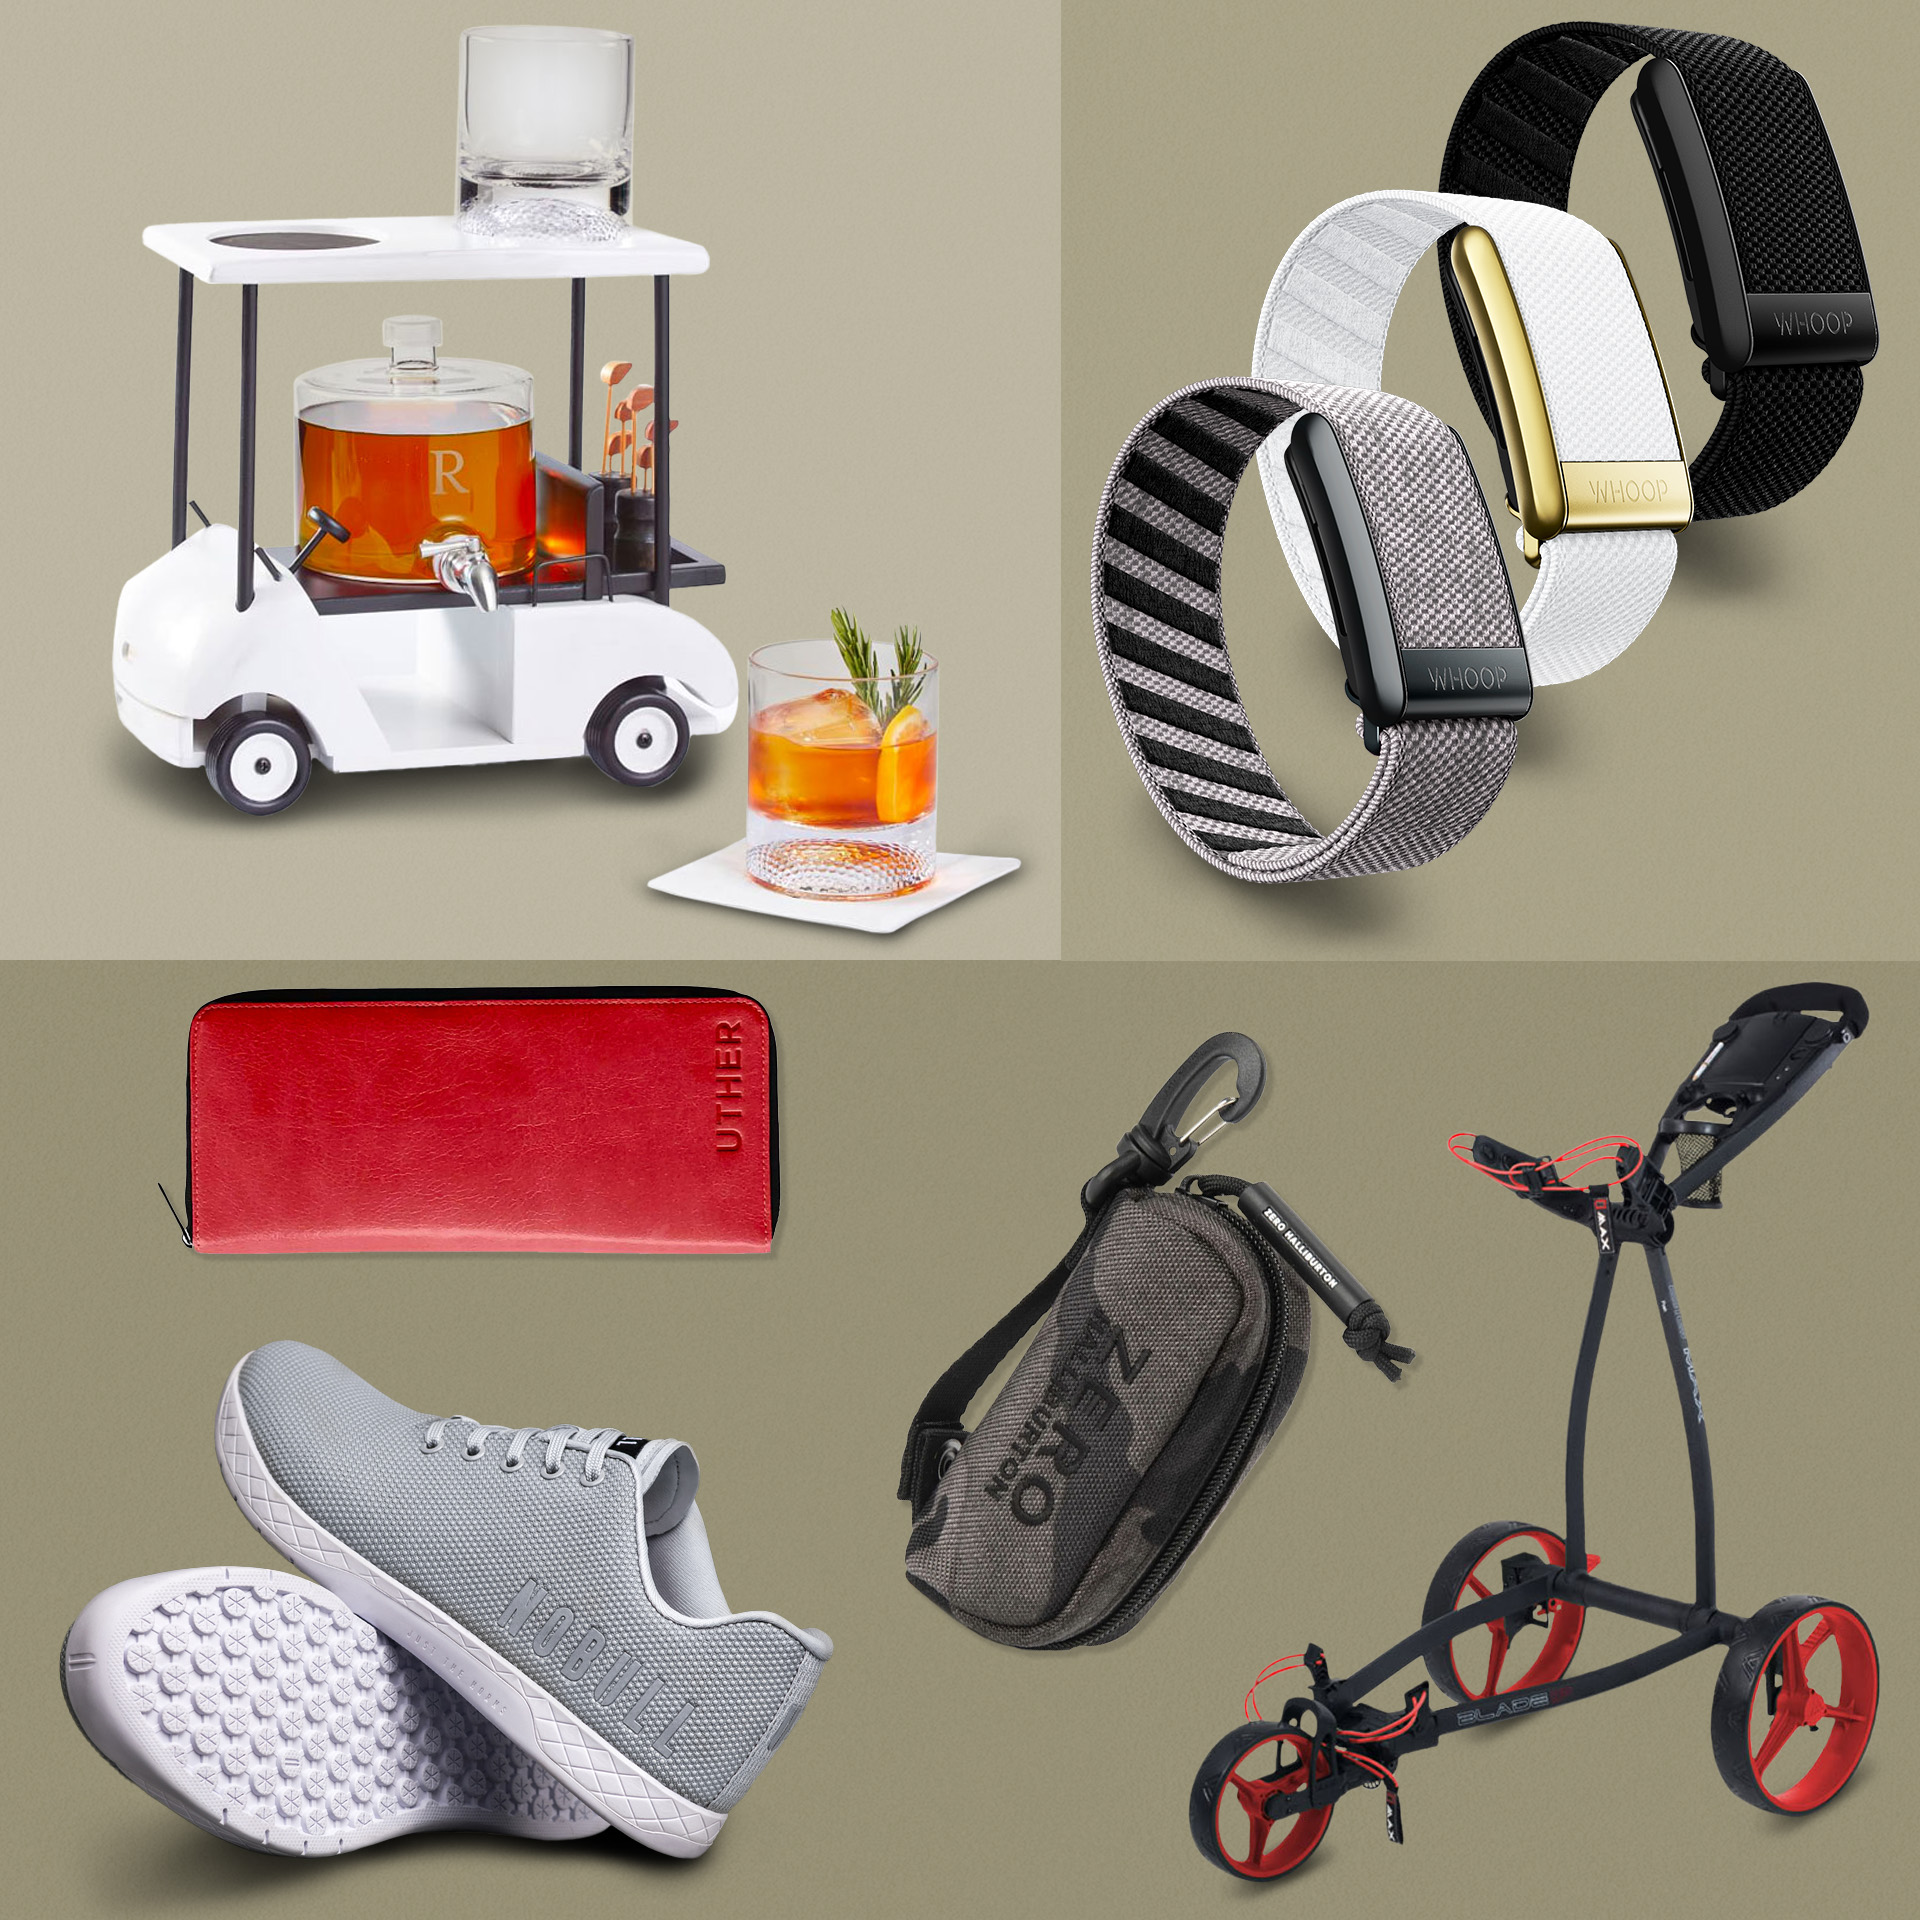 Best Golf Gifts 2022: Ideas for golfers who have everything | Golf Equipment: Clubs, Balls, Bags | Golf Digest